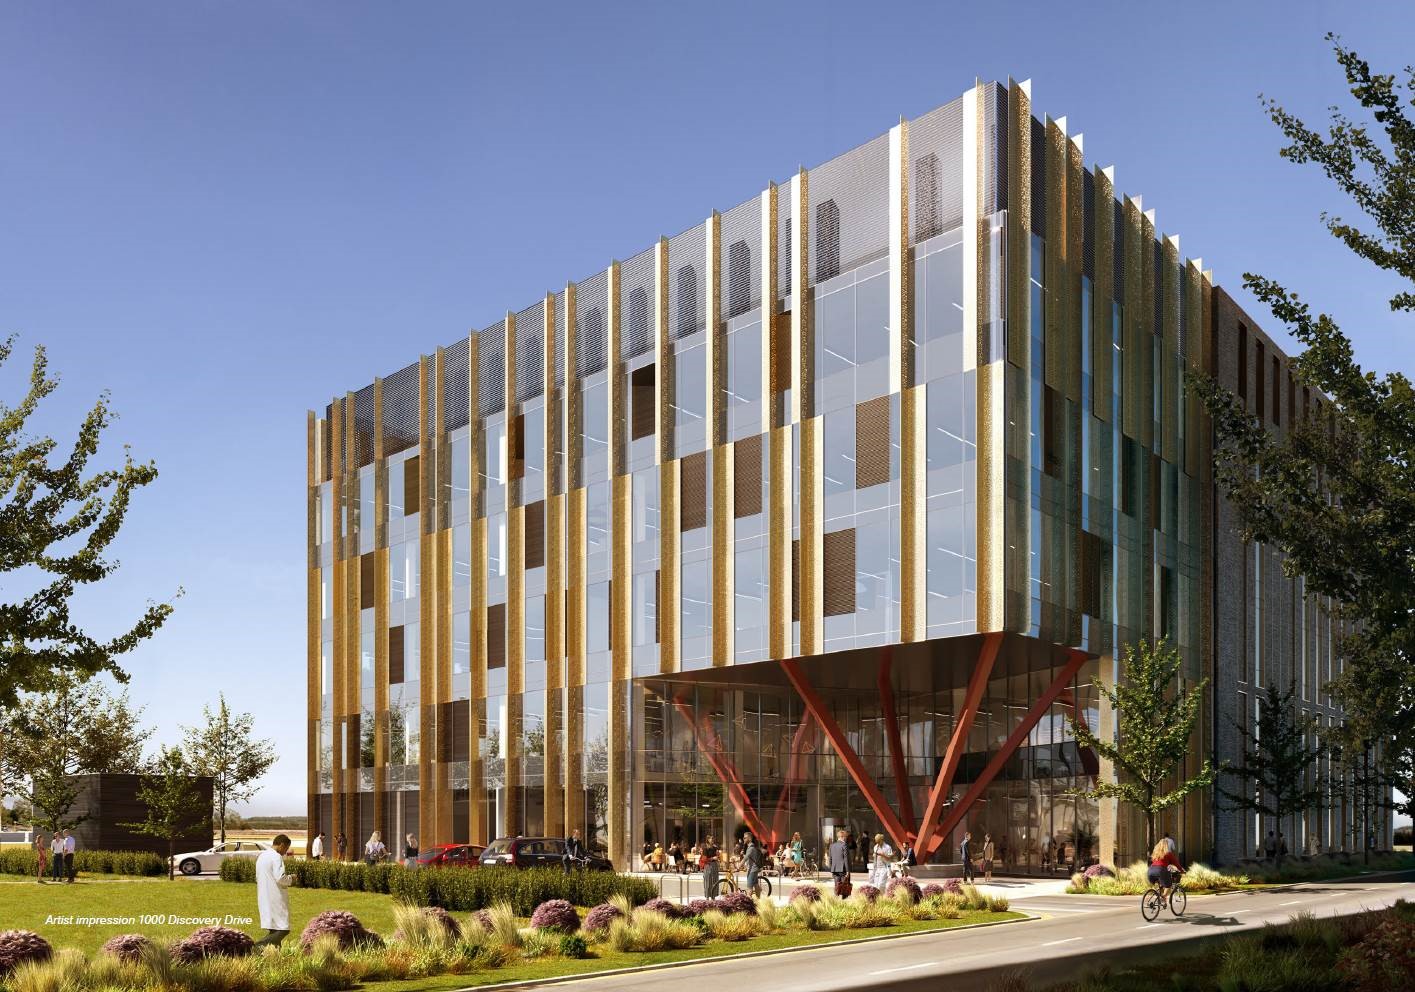 A new, multi-tenanted biomedical research building